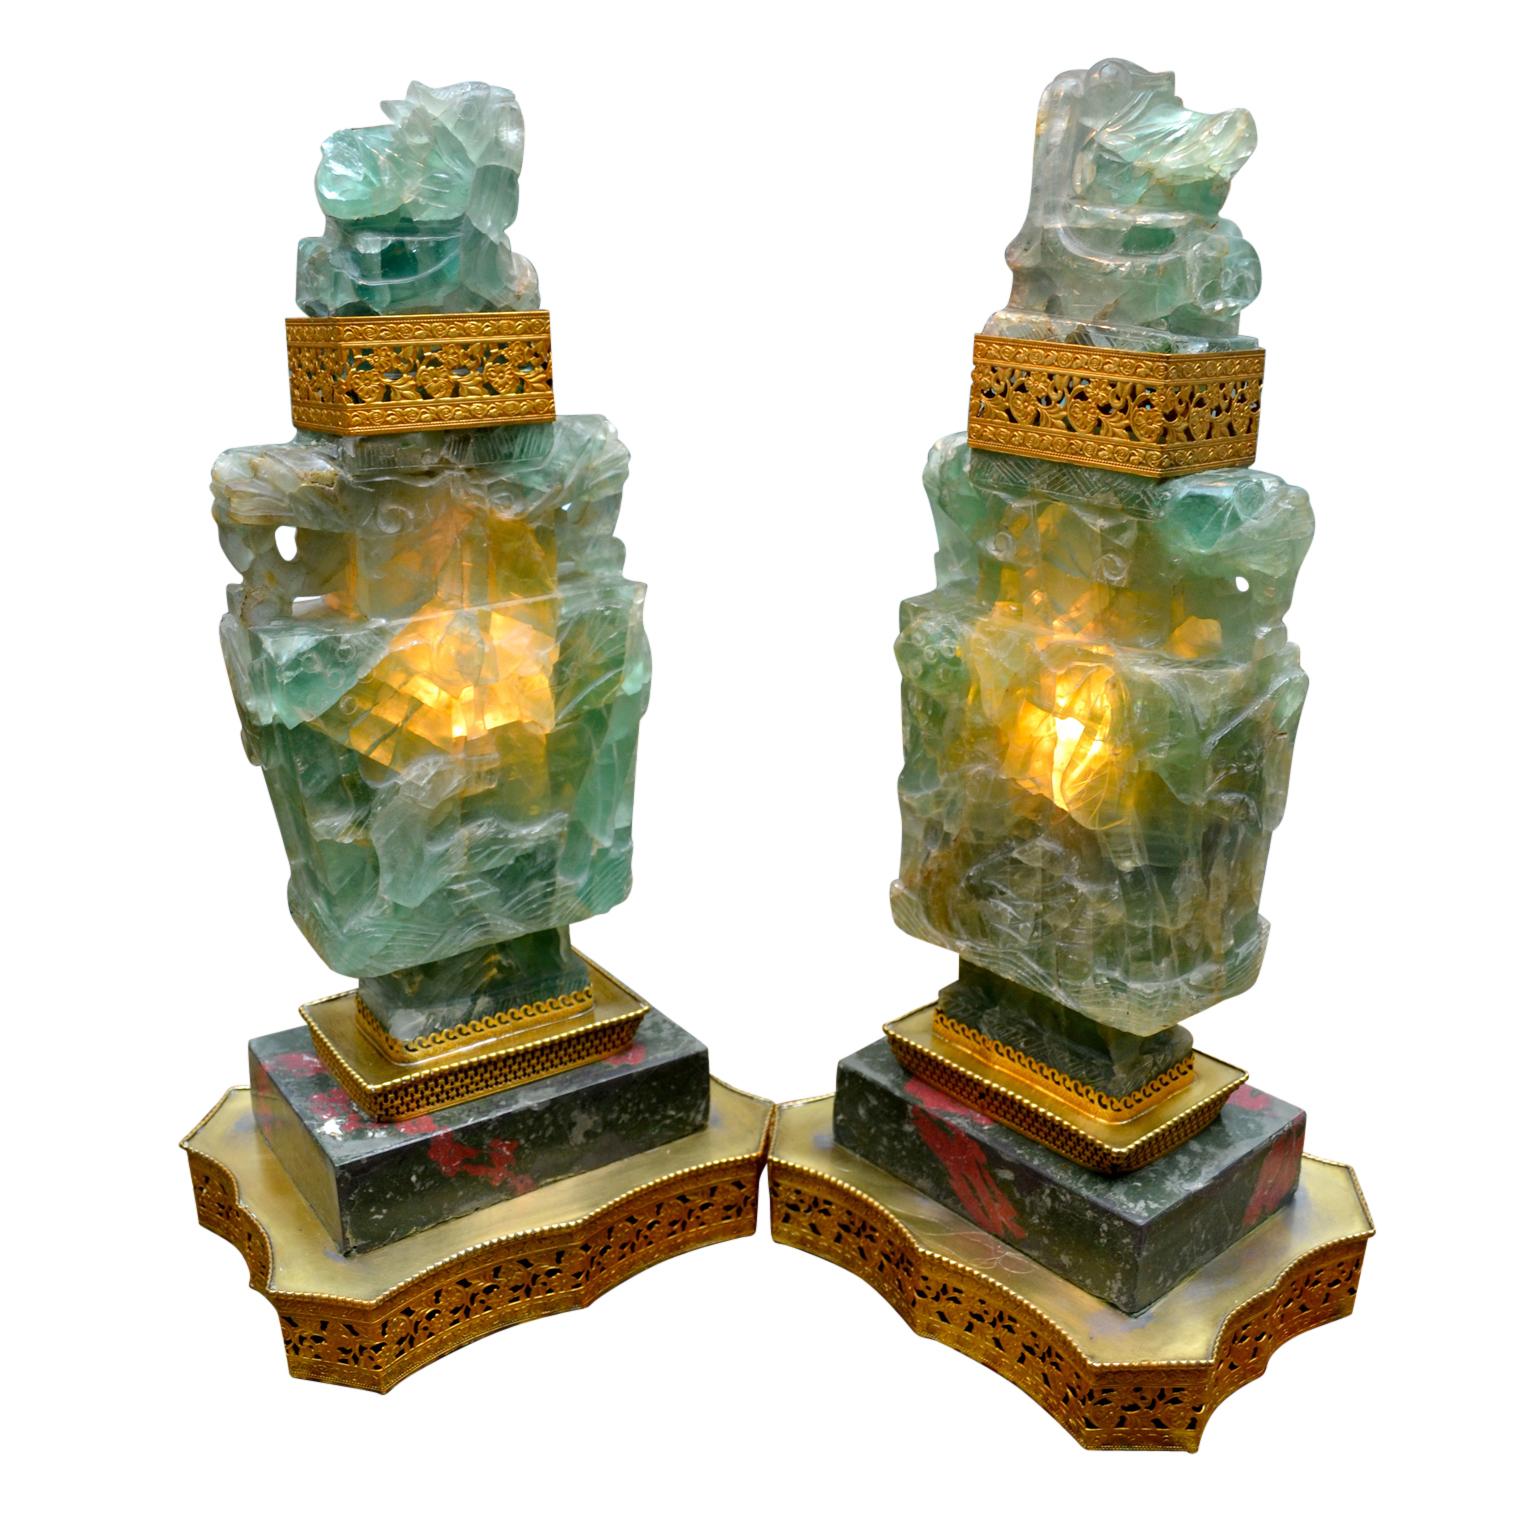 Chinese Export Pair of Large 'Quartz' Lamps on Decorative Bases